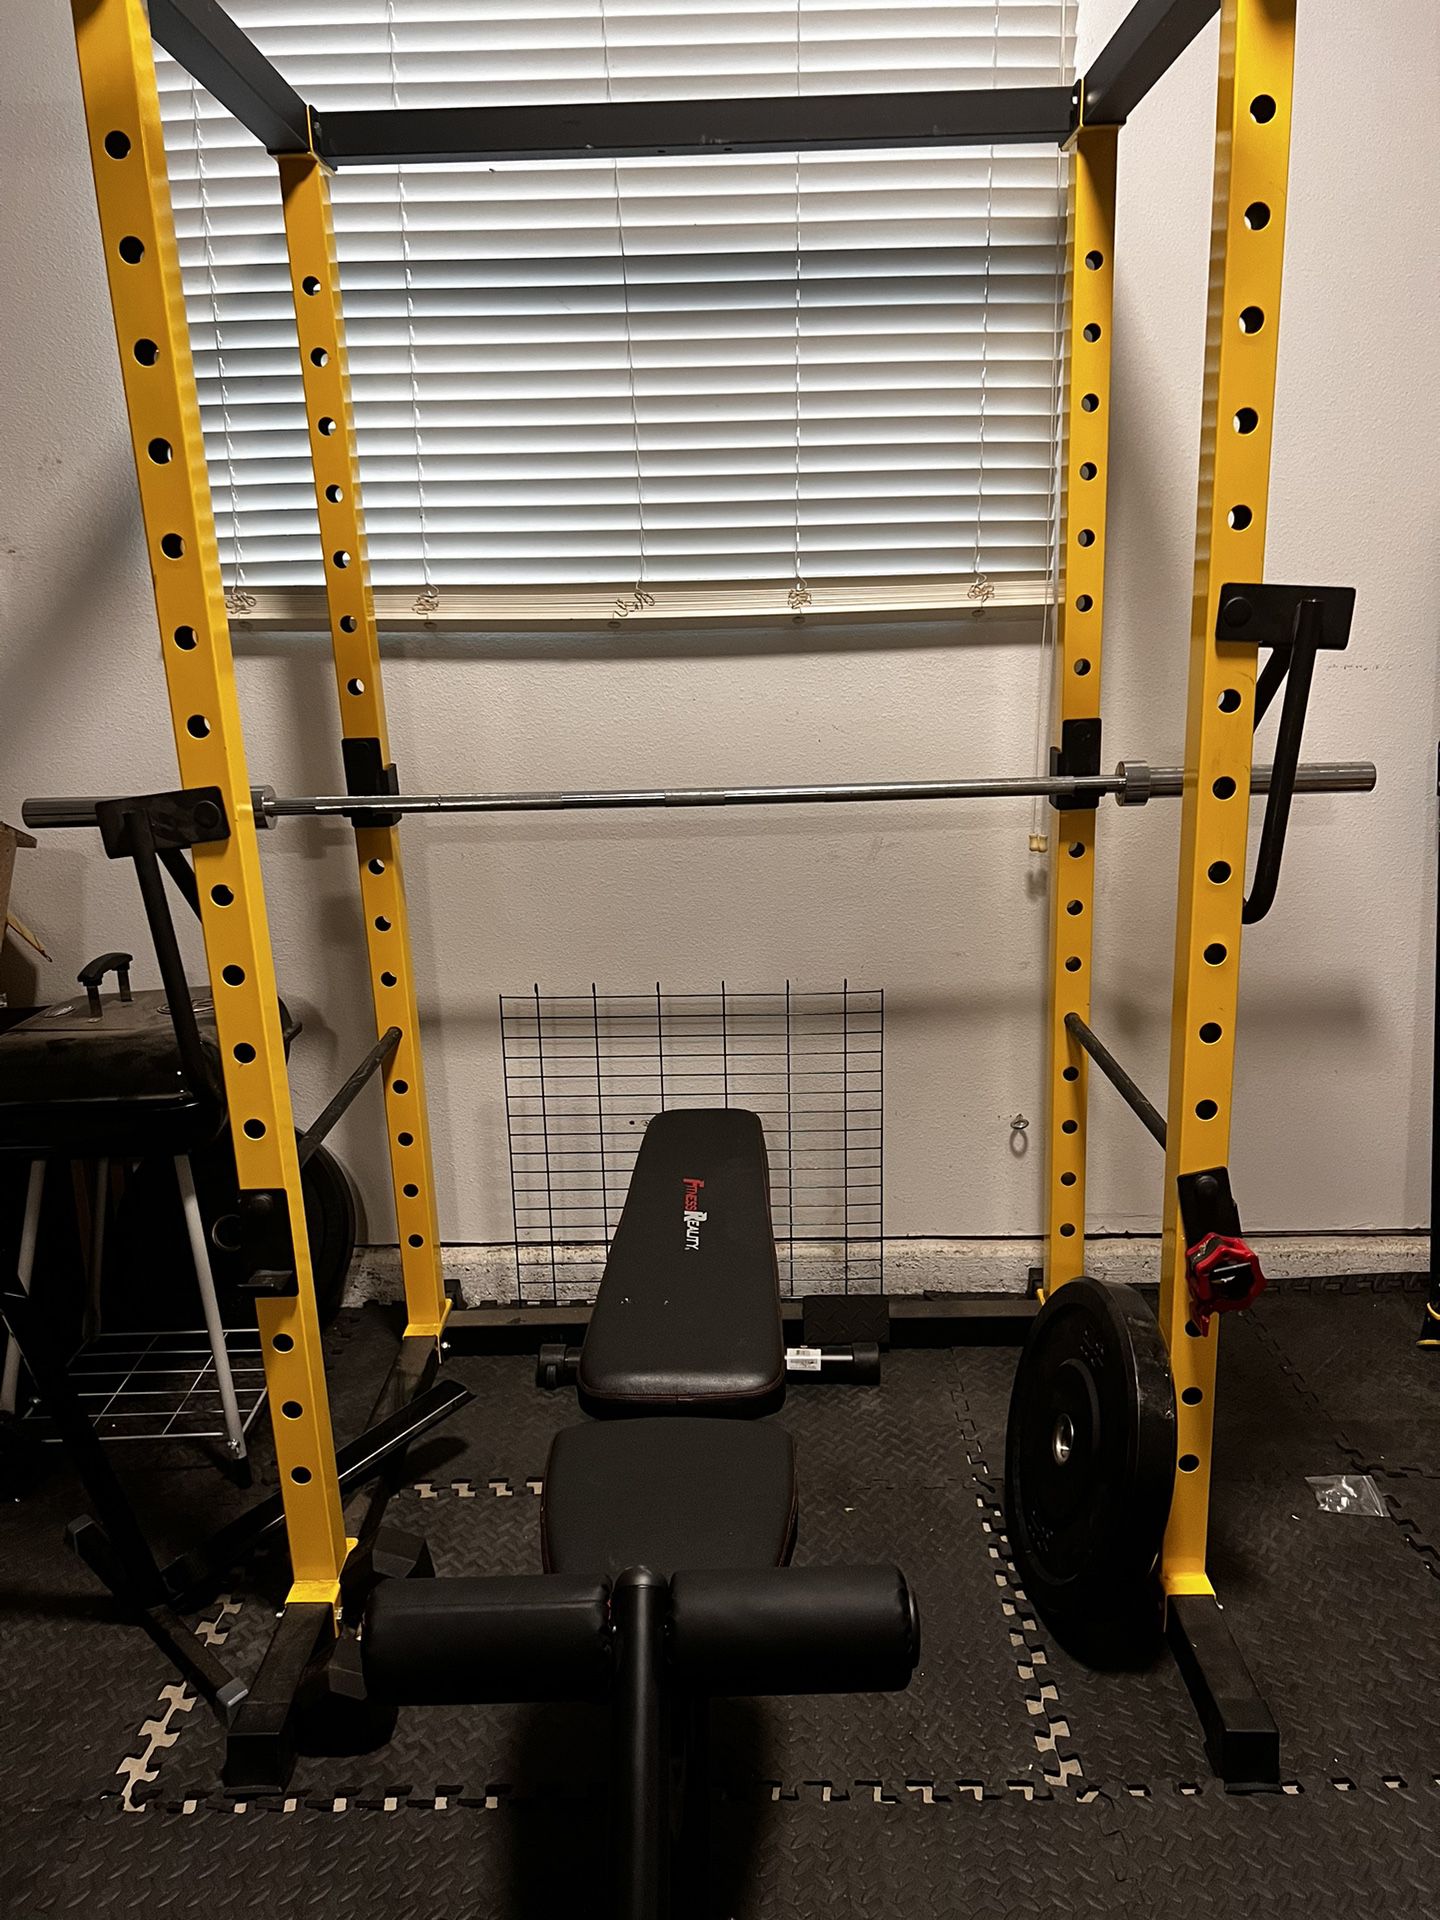 Gym Rack With Bench And Weights